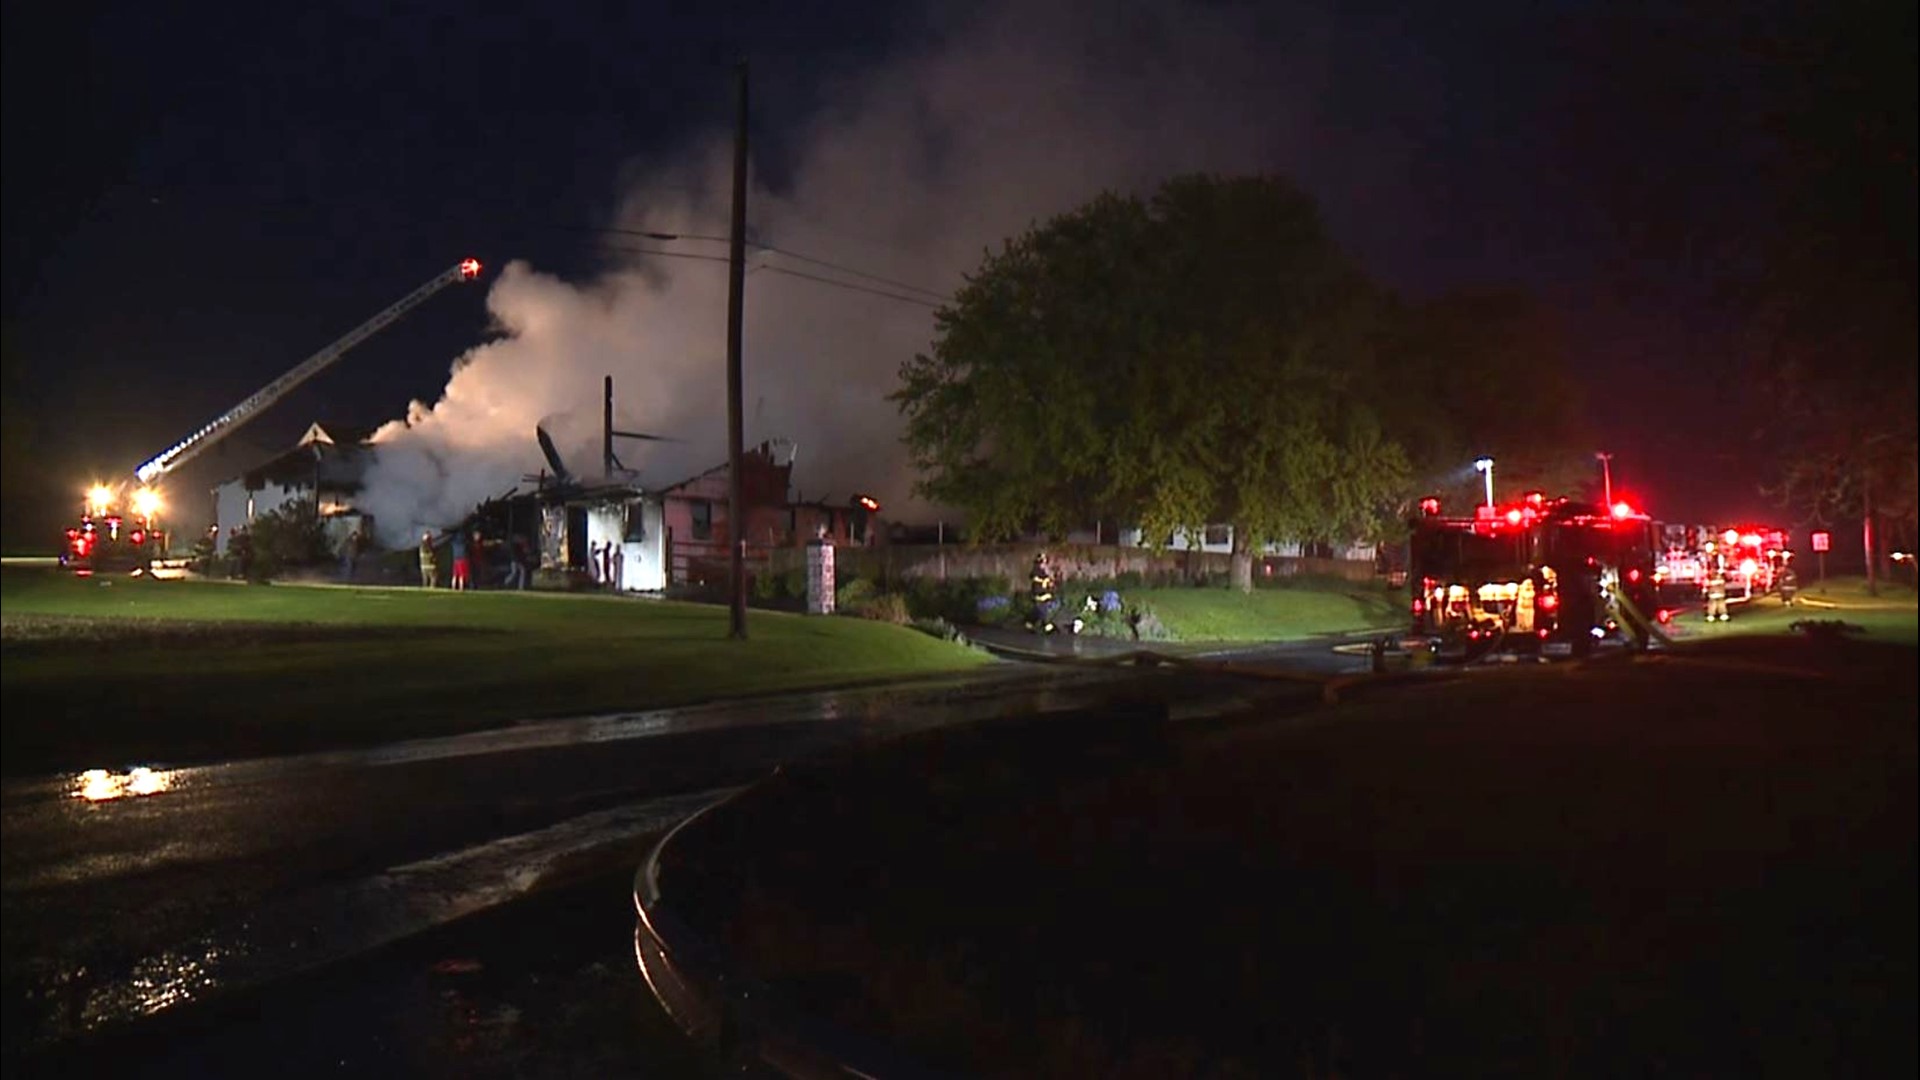 The call came in at 3:08 a.m., about a fire at a barn located on Back Run Road and Bricker Road, also according to dispatch.